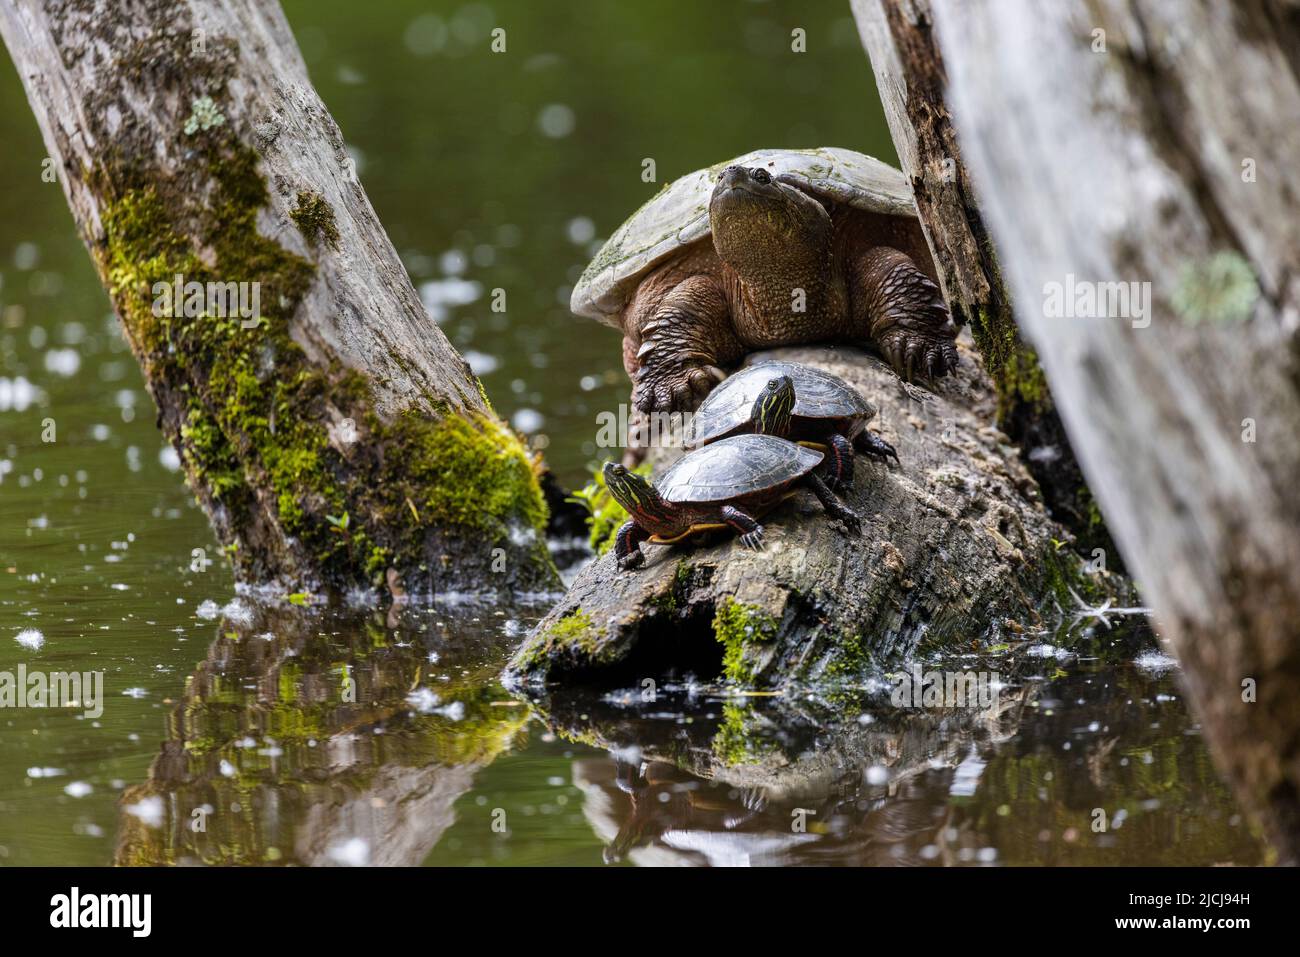 common snapping turtle (Chelydra serpentina) and painted turtle (Chrysemys picta) Stock Photo